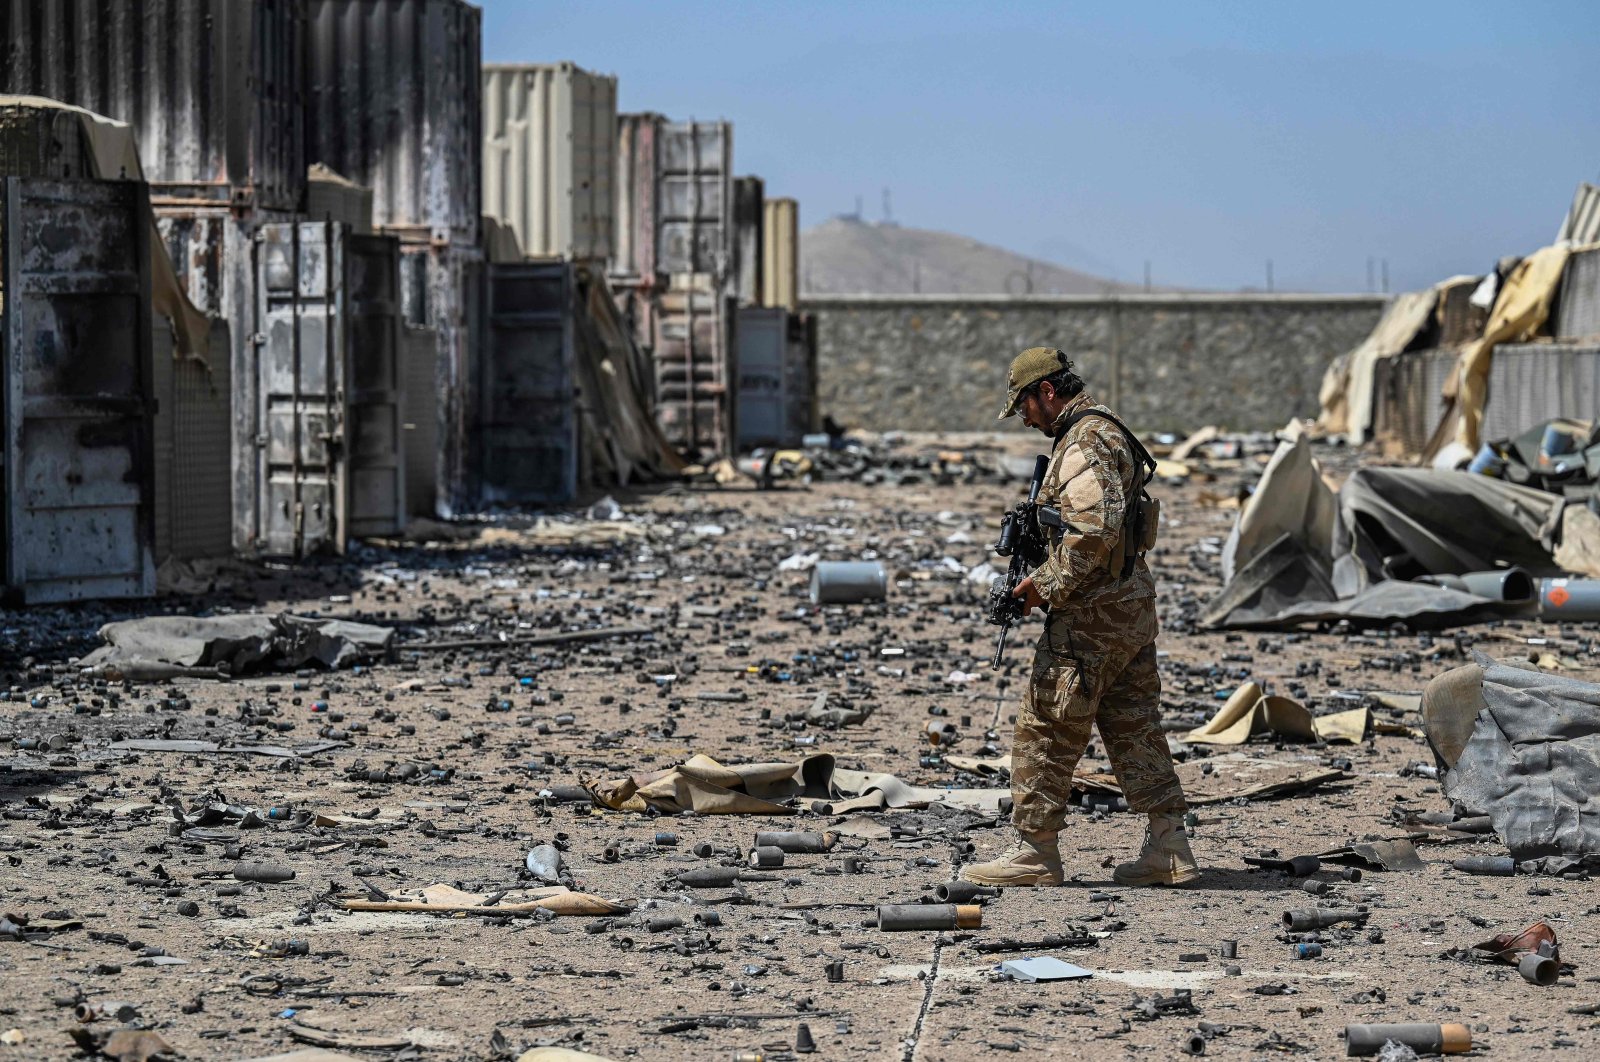 In this file photo, a member of the Taliban Badri 313 military unit walks amid debris of the destroyed Central Intelligence Agency (CIA) base in Deh Sabz district northeast of Kabul after the U.S. pulled all its troops out of the country, Kabul, Afghanistan, Sept. 6, 2021 (AFP Photo)